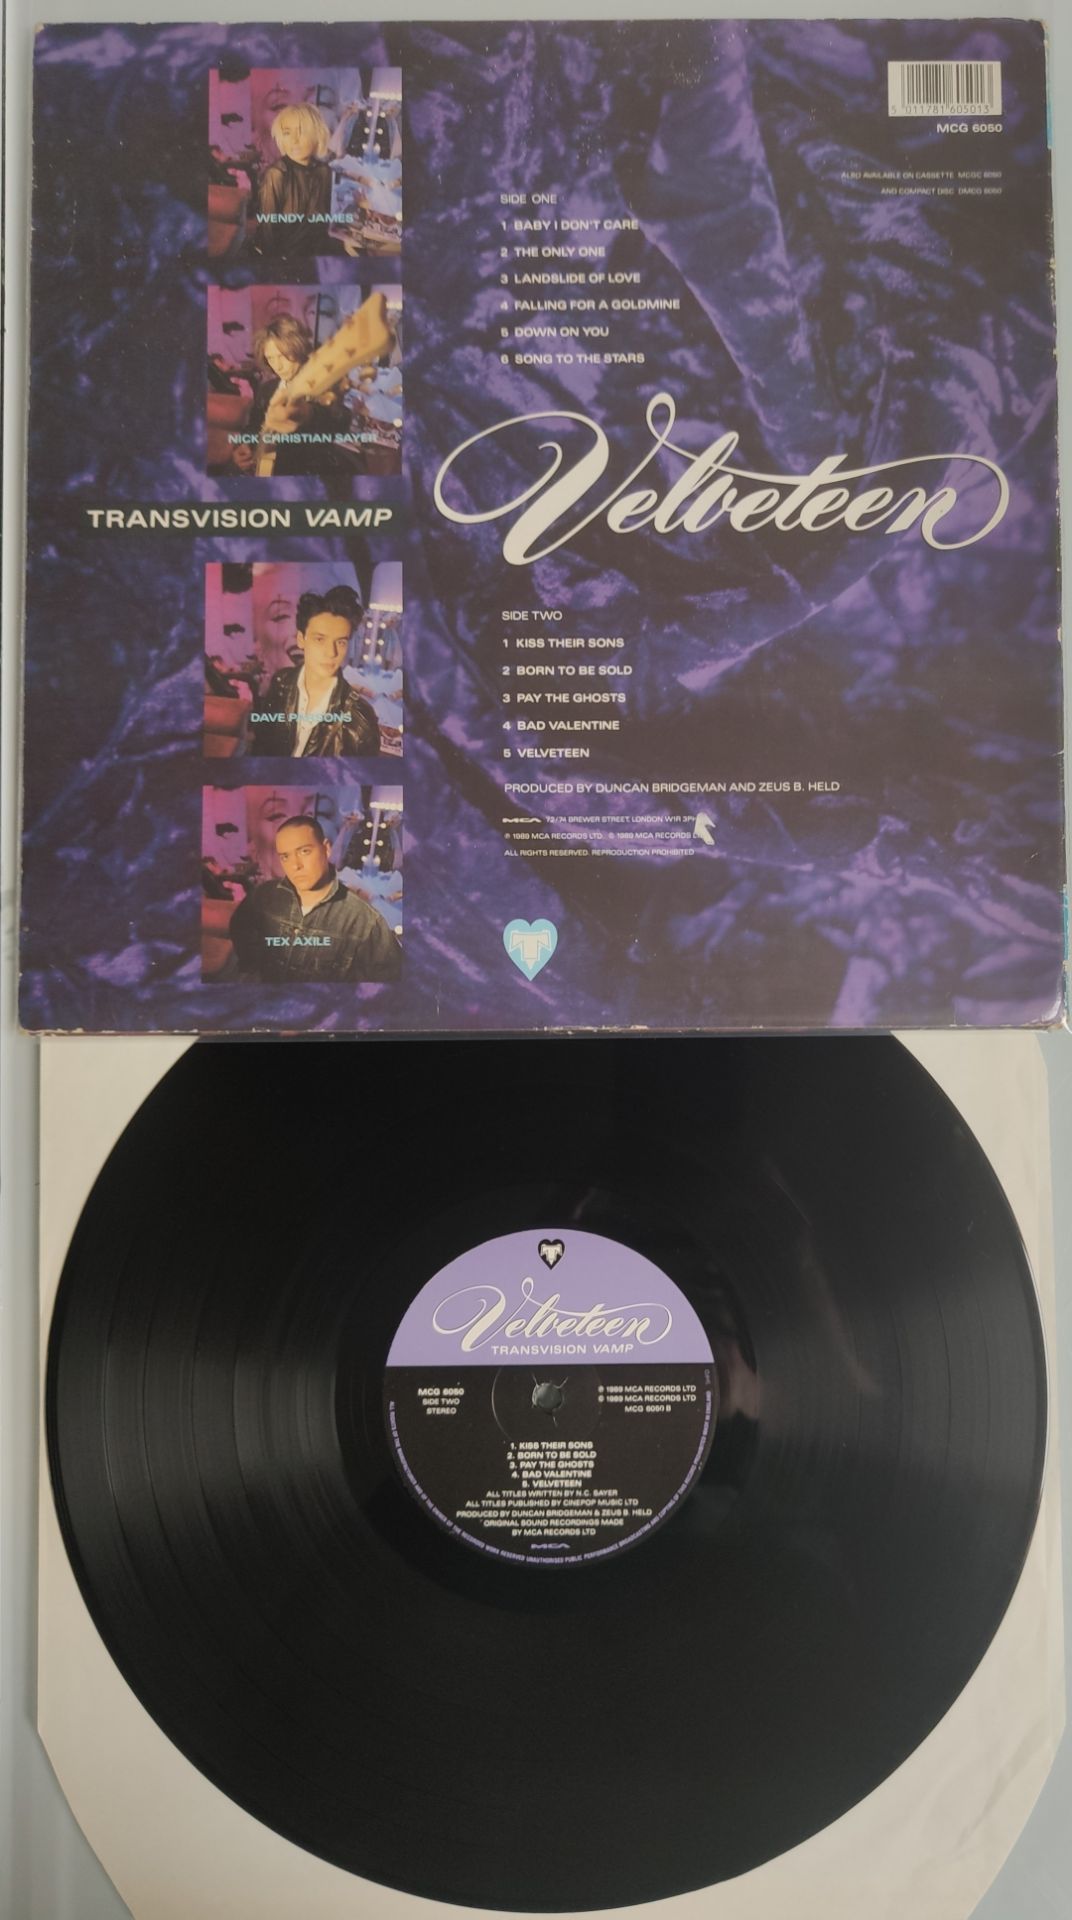 Autographed Transvision Vamp – Velveteen Vinyl LP – UK 1989 First Pressing A1 / B1 - Image 3 of 8